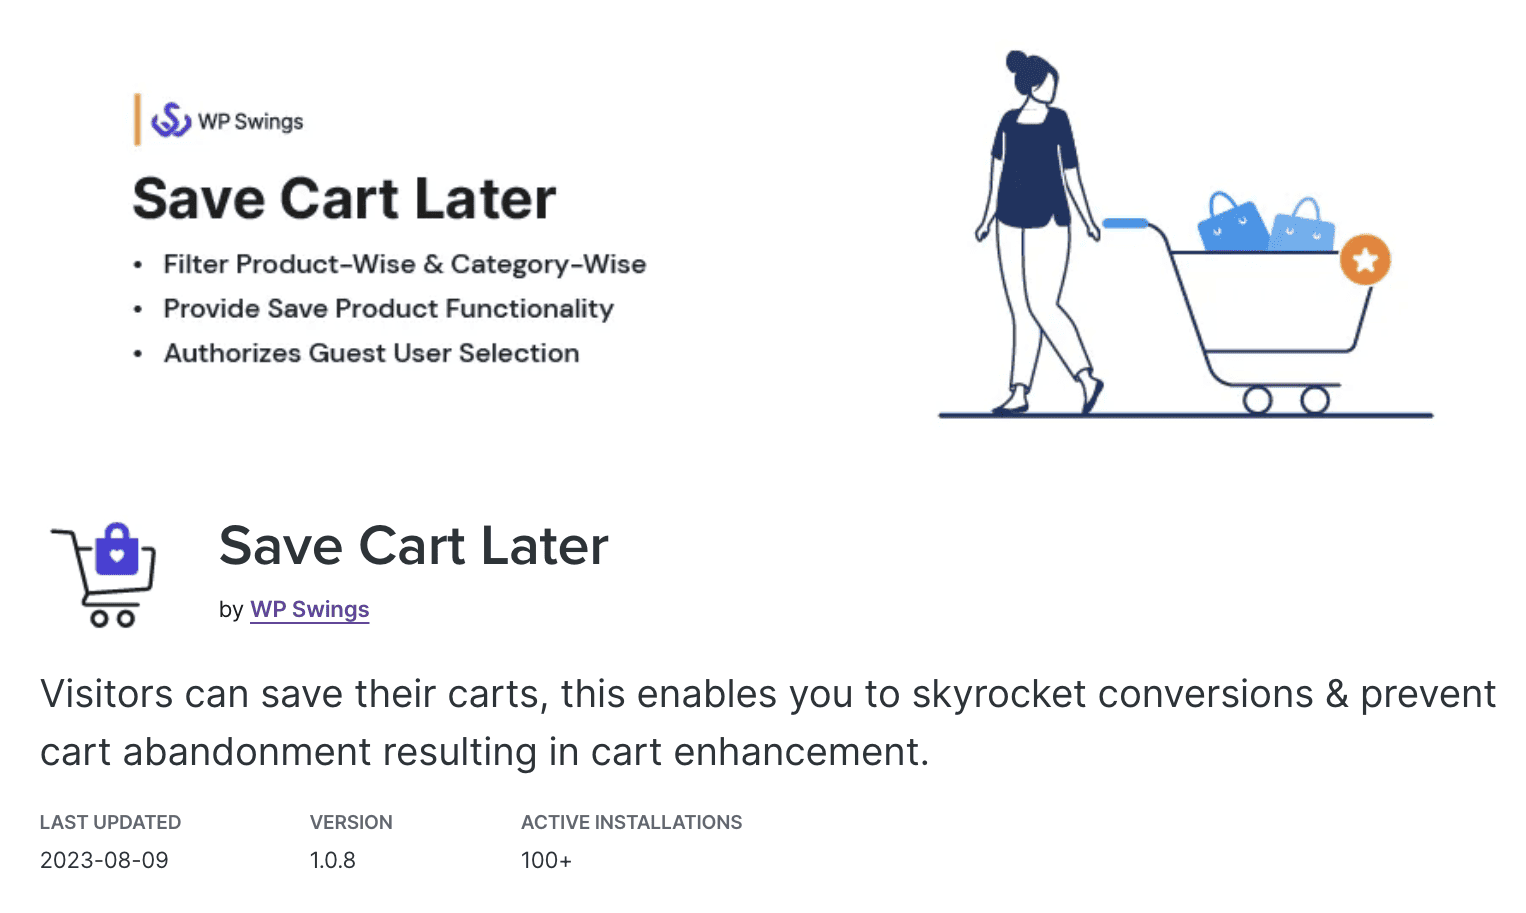 Save Cart Later by WP Swings